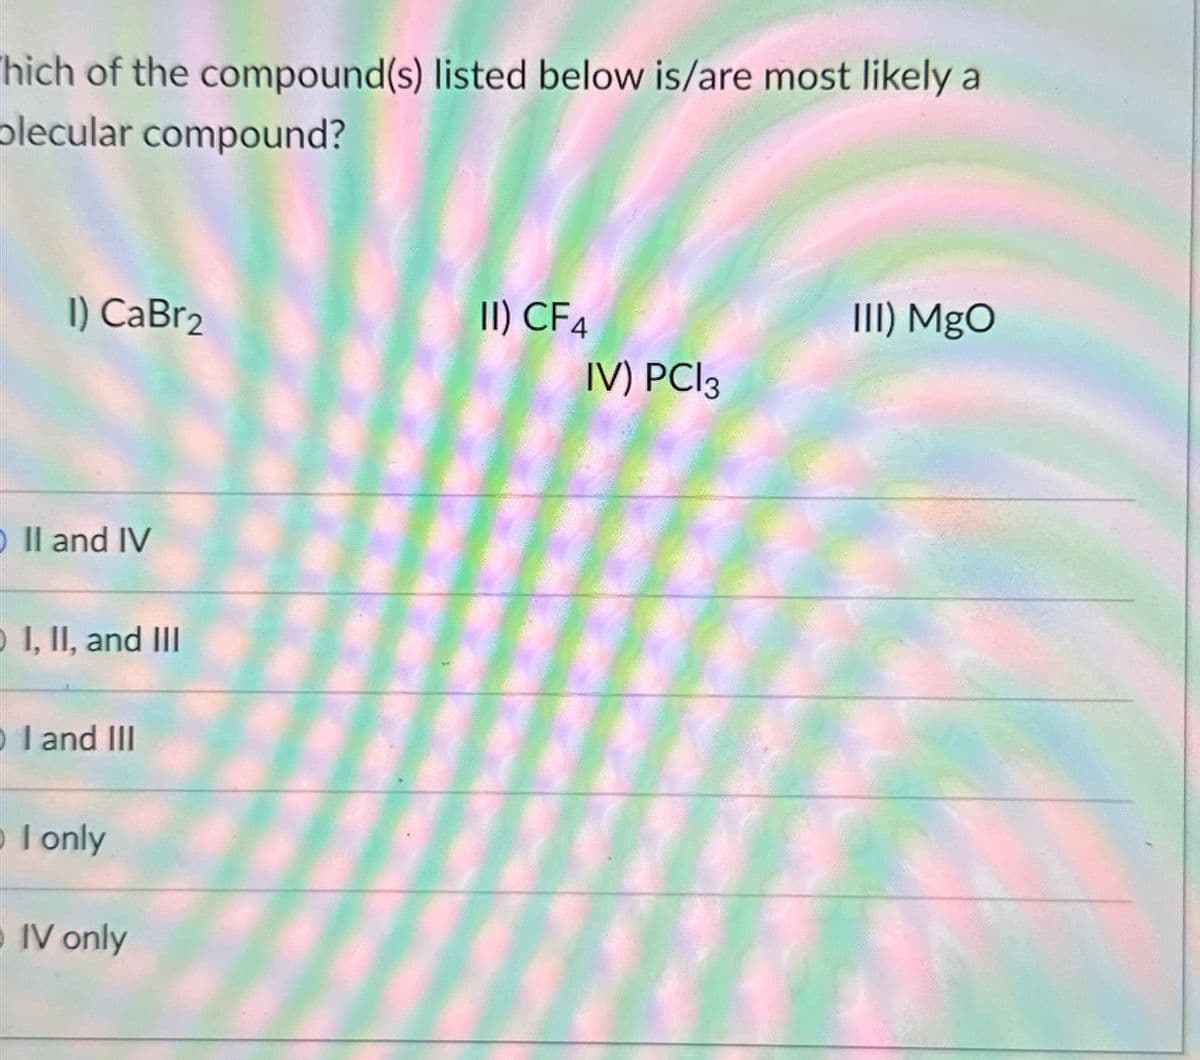 hich of the compound(s) listed below is/are most likely a
olecular compound?
1) CaBr2
II) CF4
III) MgO
IV) PC|3
O II and IV
I, II, and III
I and III
I only
IV only